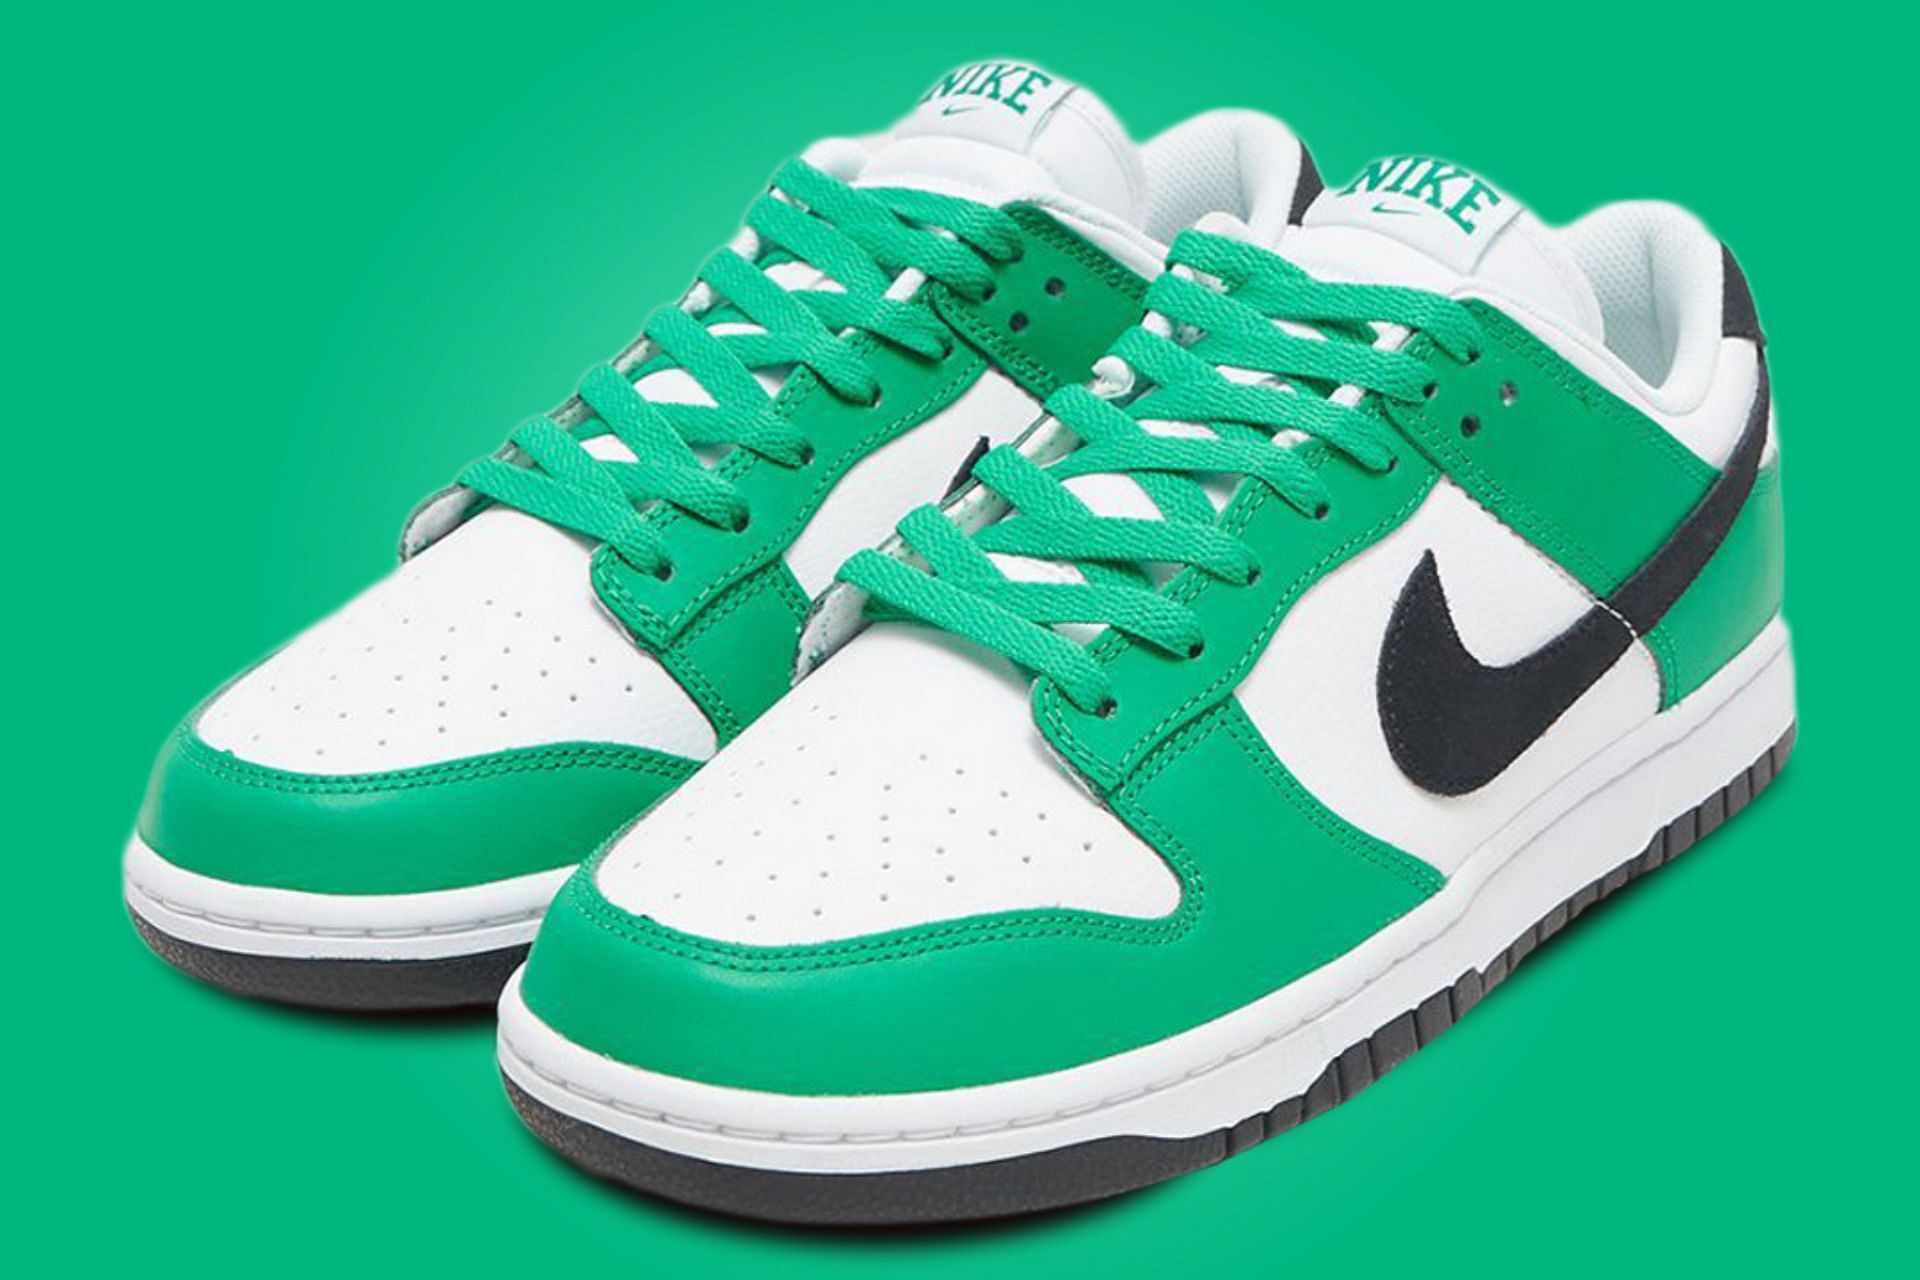 Celtics Nike Dunk Low “Celtics” shoes Where to buy, price, and more